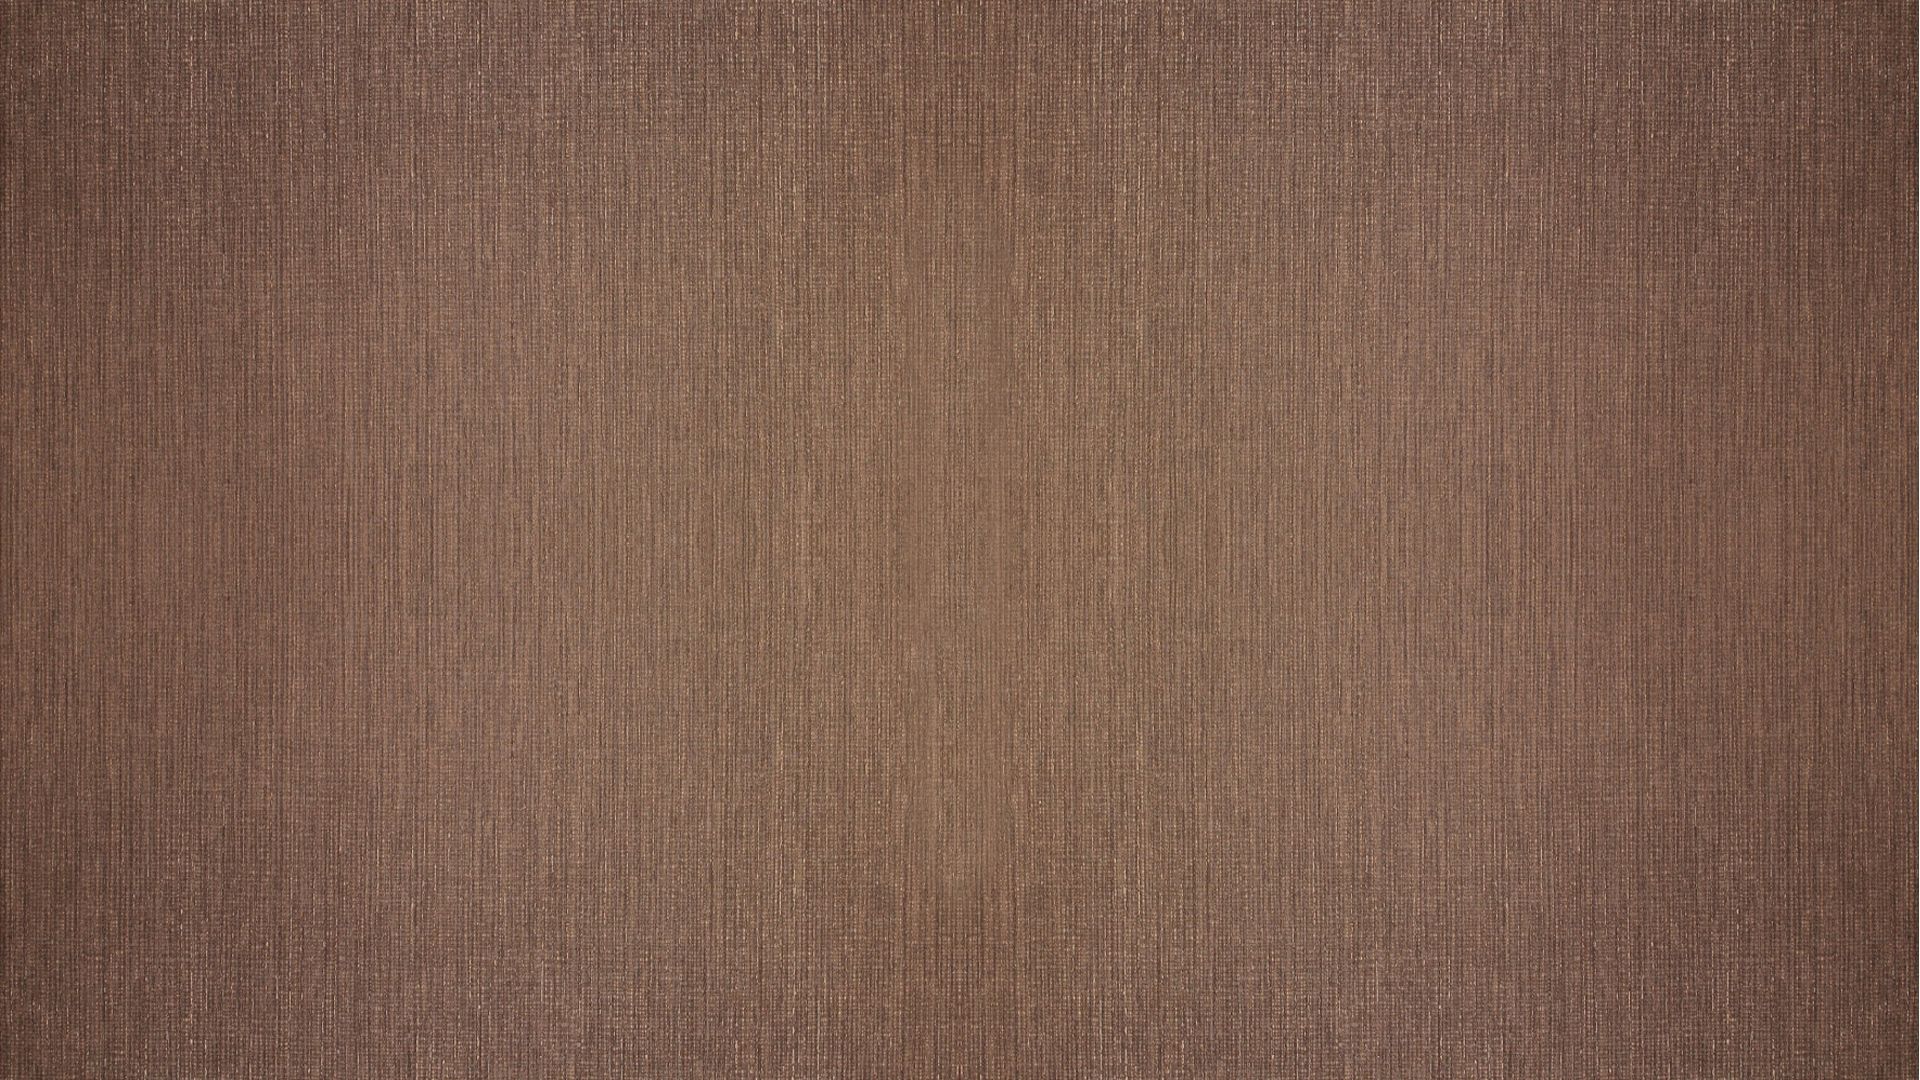 brown, textures, texture, surface, faded Full HD